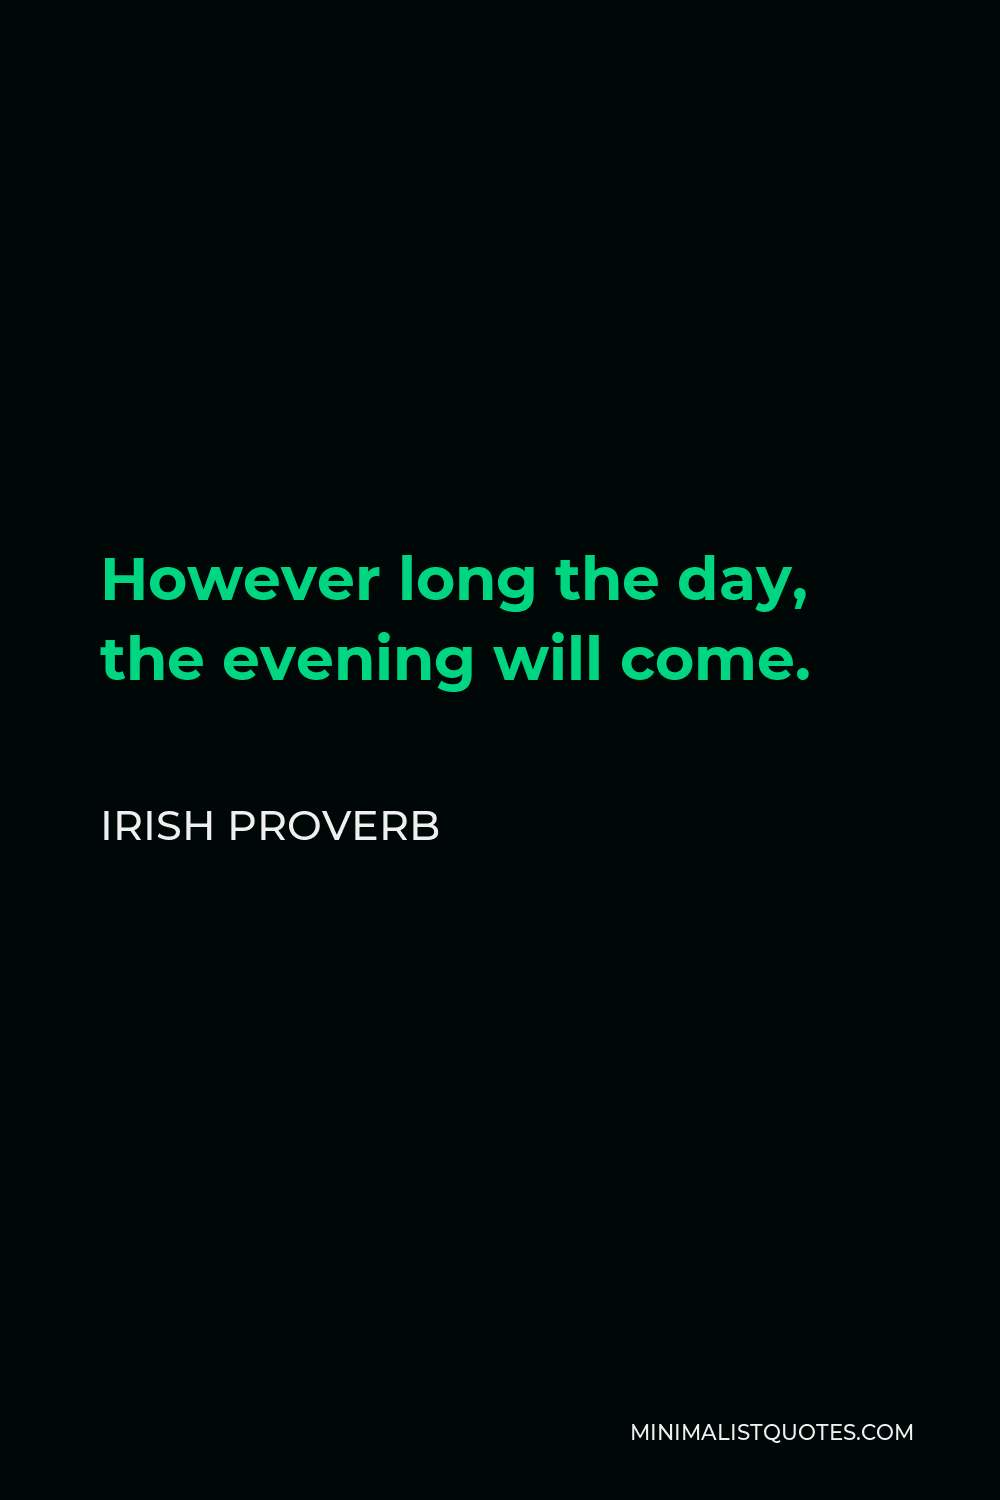 Irish Proverb Quote - However long the day, the evening will come.